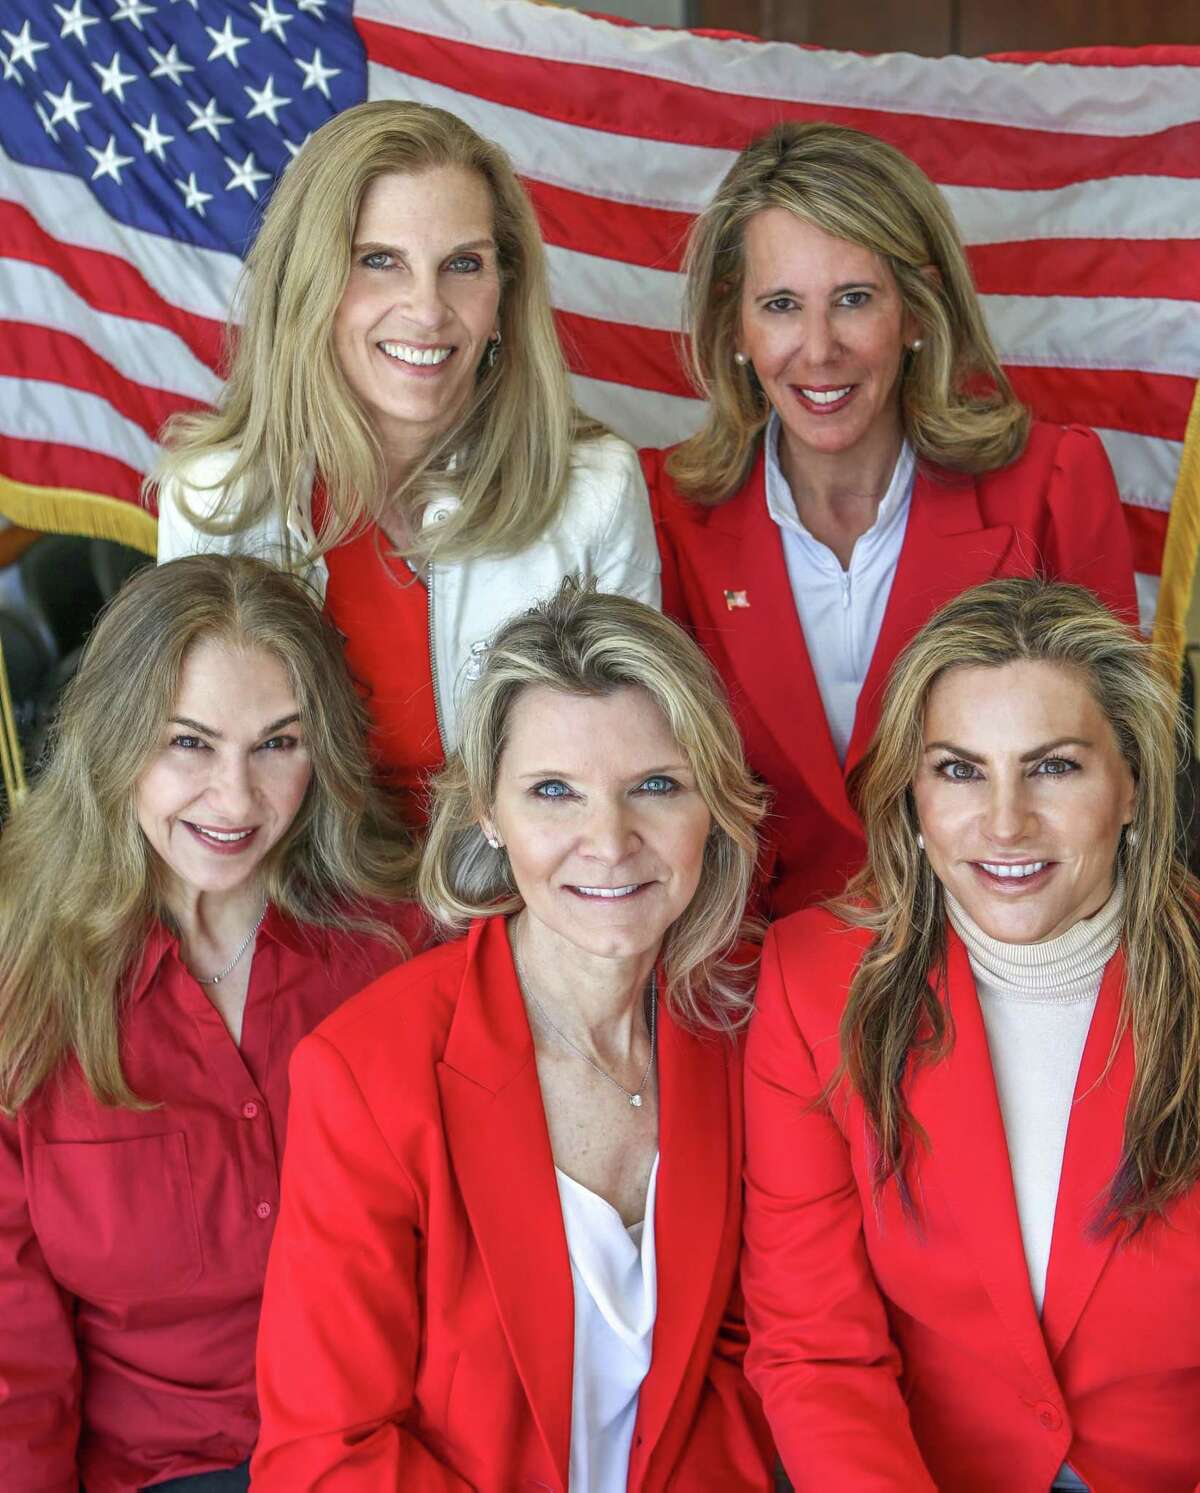 The leaders of the Greenwich Republican Town Committee. In the back row, Beth MacGillivray, chairwoman, and Jane Sprung, vice chair; and in the front row: Gail Lauridsen, secretary, Cheryl Resnick, treasurer, Laura Darrin, vice chair